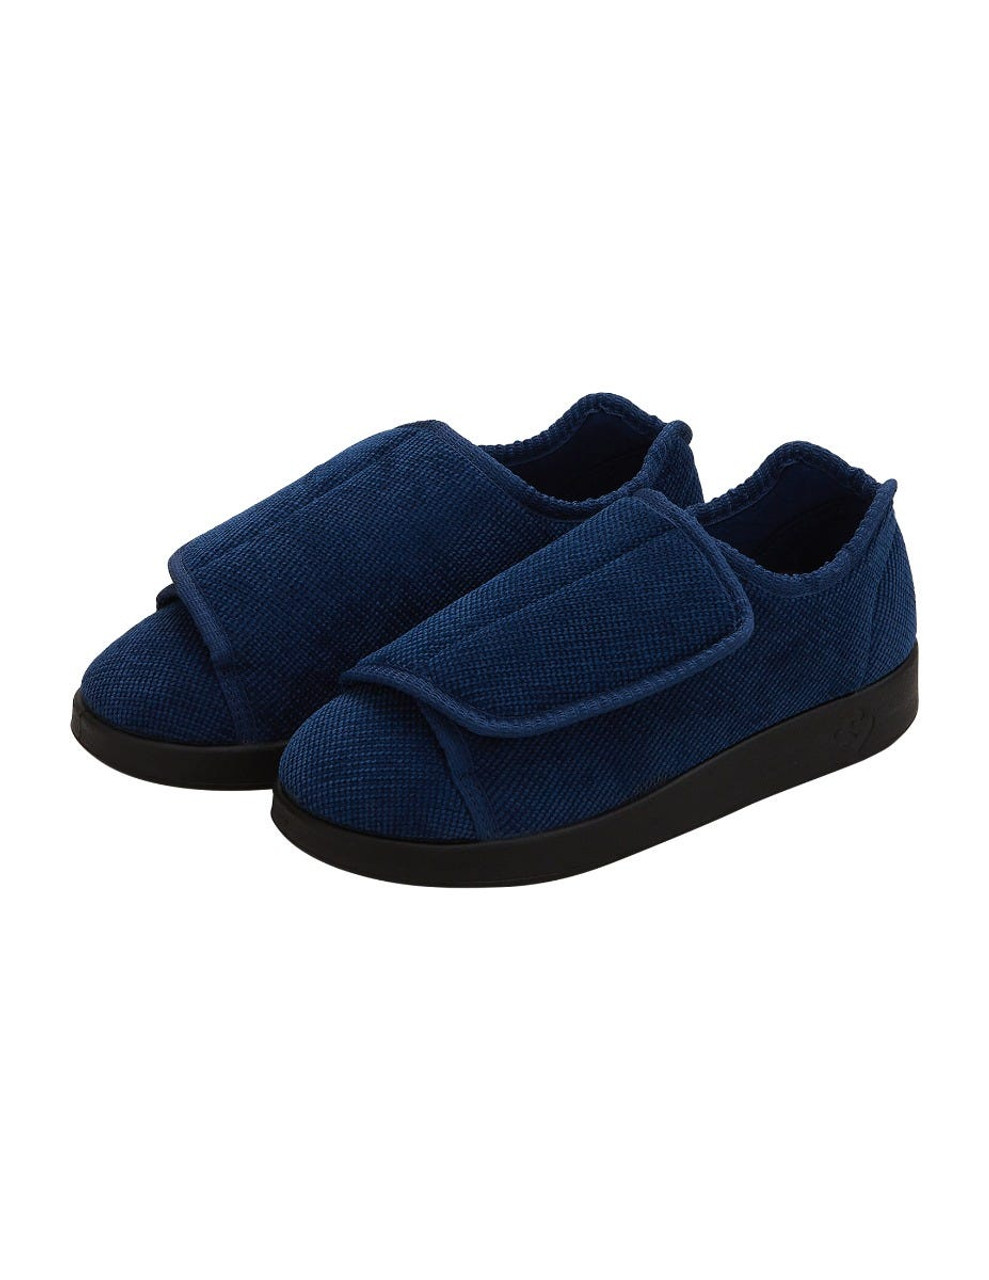 Silverts SV15100 Womens Extra Extra Wide Easy Closure Slippers Navy, Size=12, SV15100-SVNVB-12